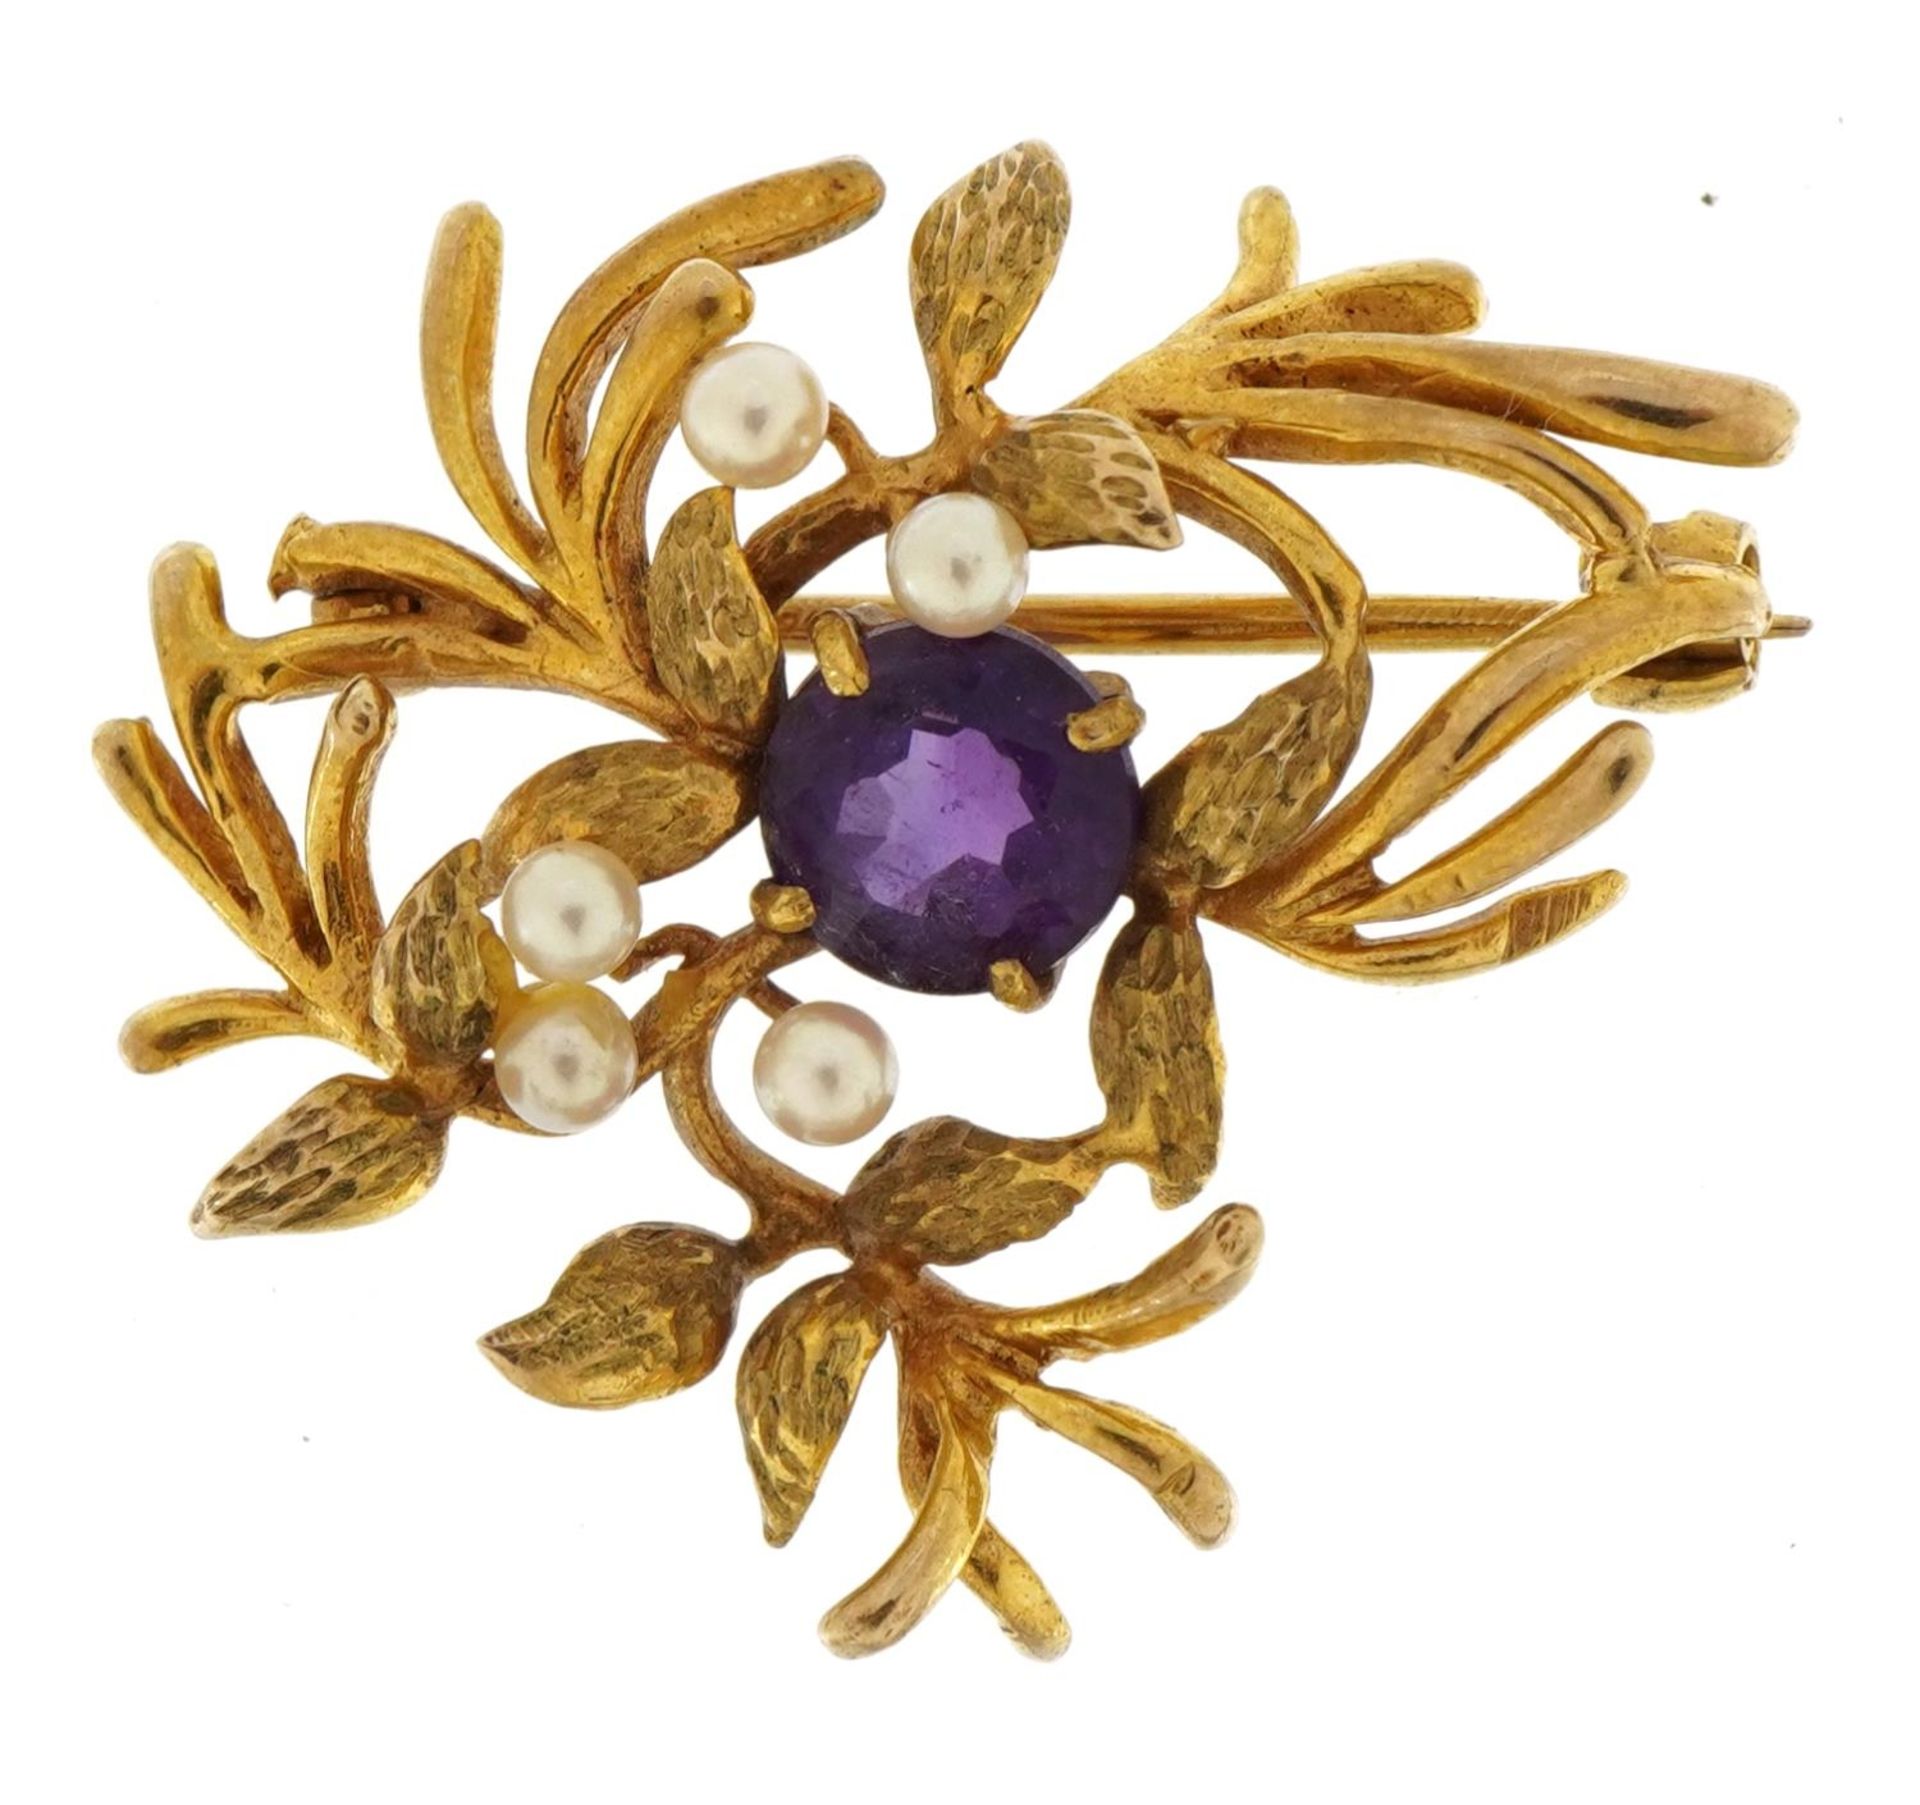 9ct gold amethyst and pearl leaf brooch, 3.2cm wide, 4.9g : For further information on this lot